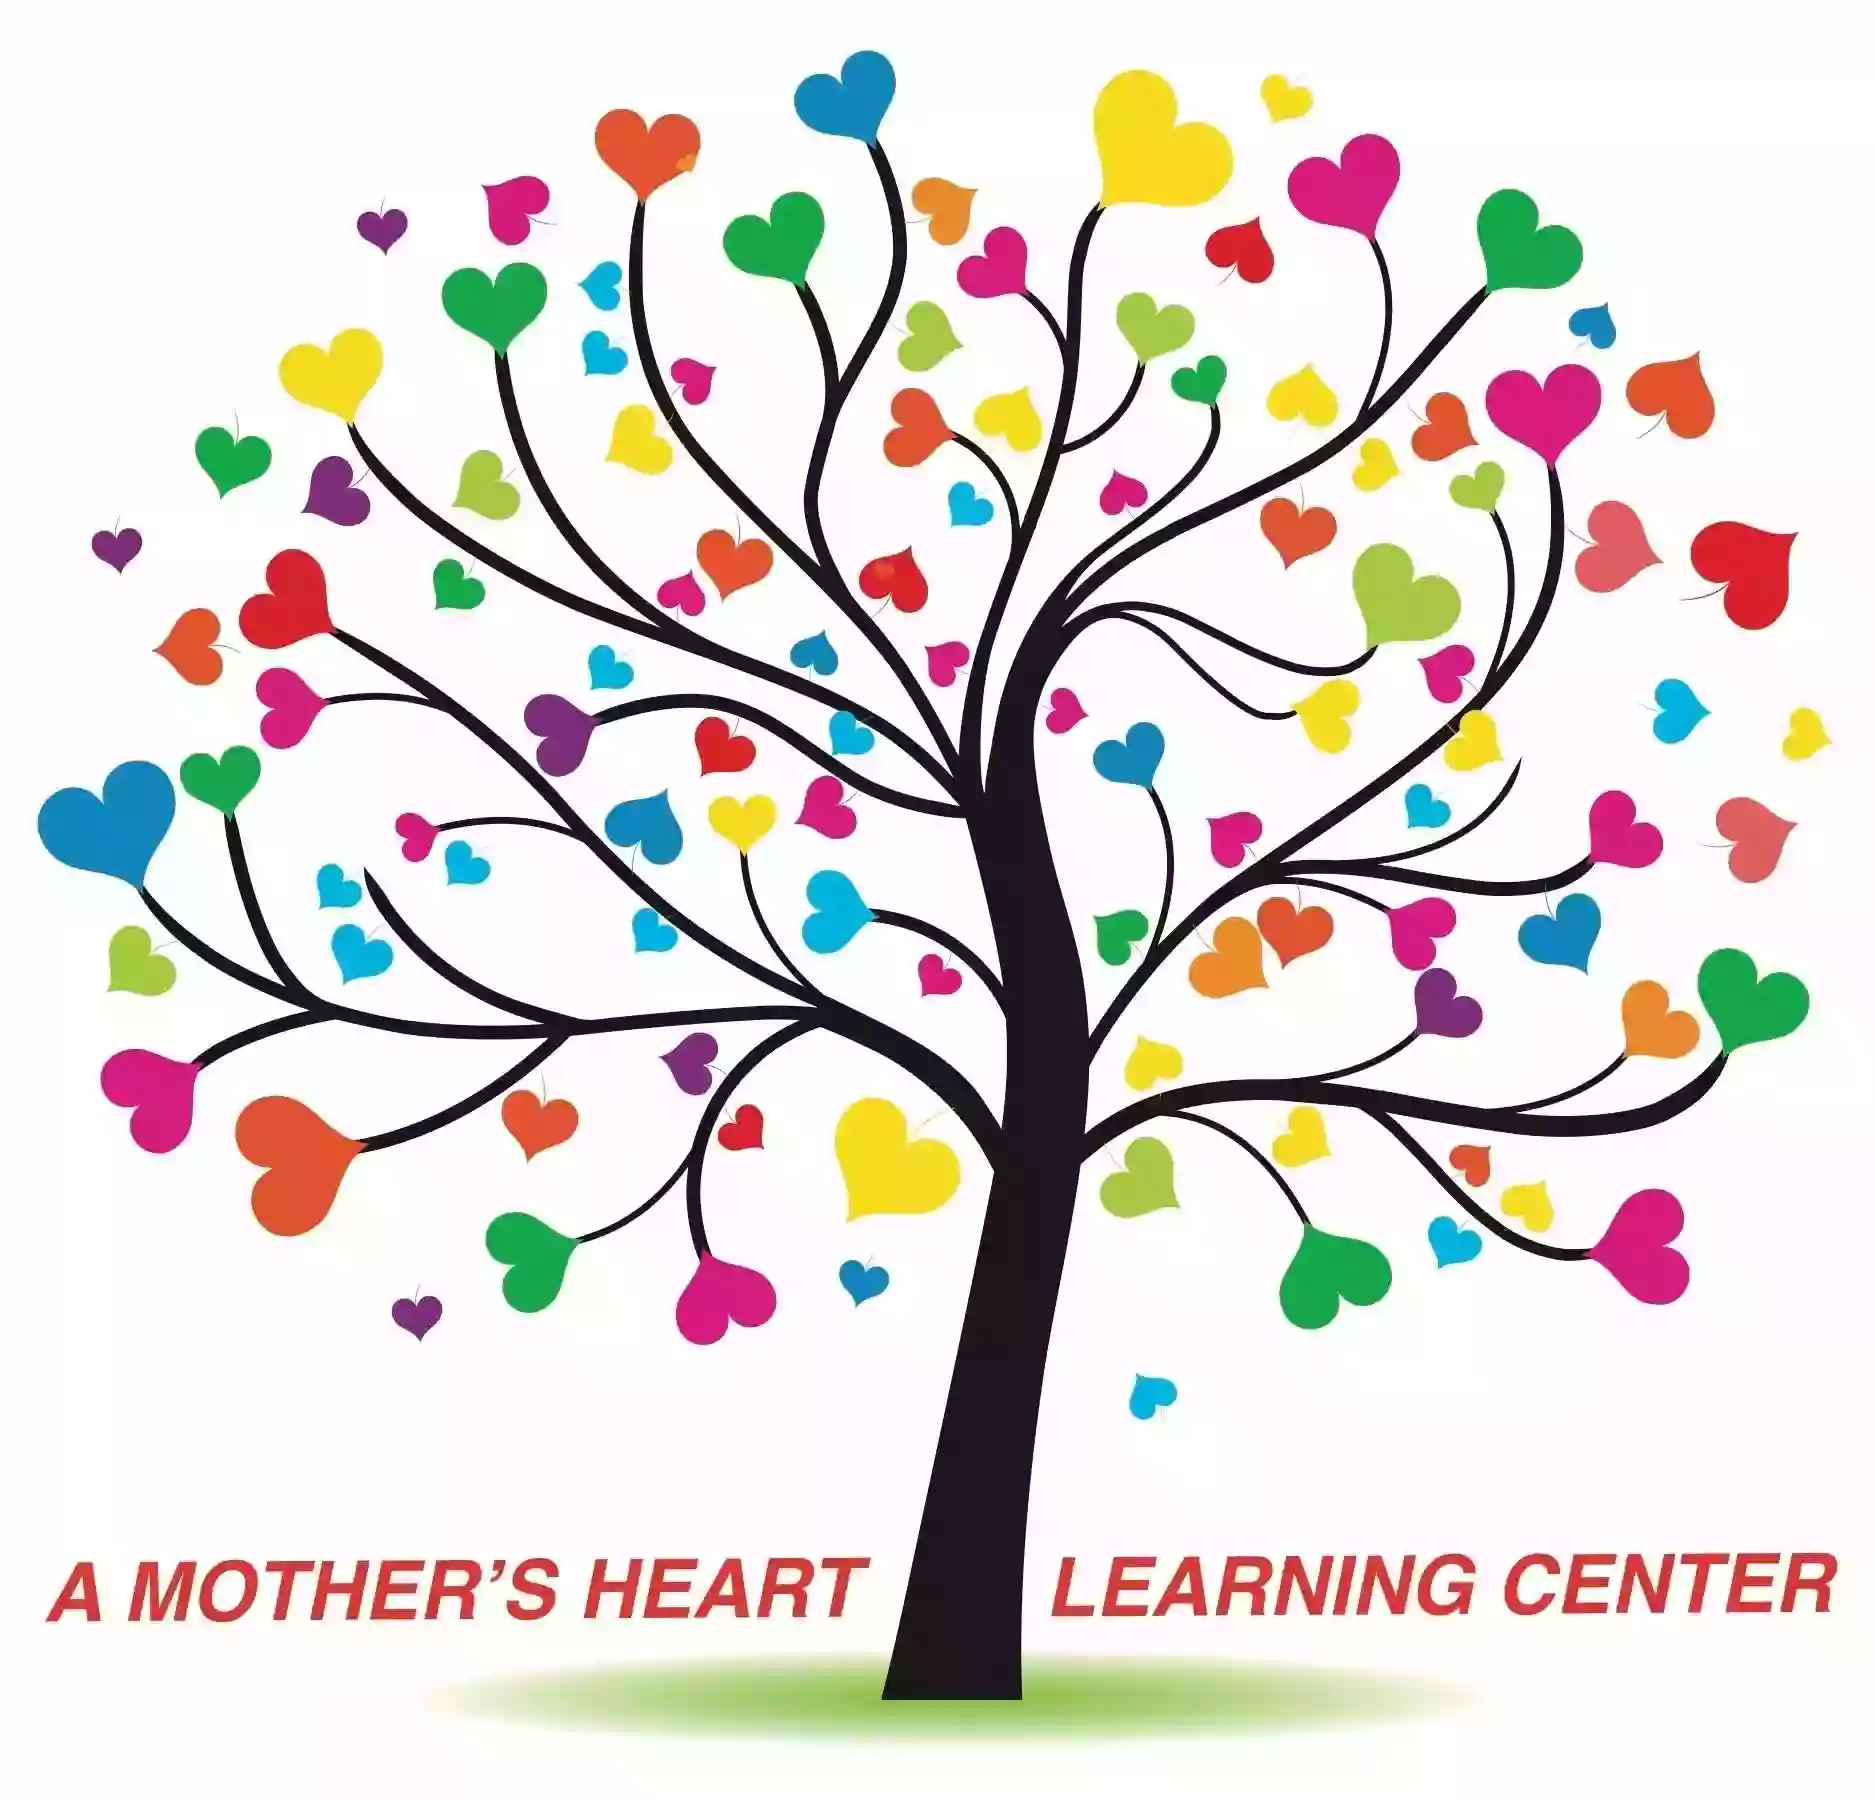 A Mother's Heart Learning Center